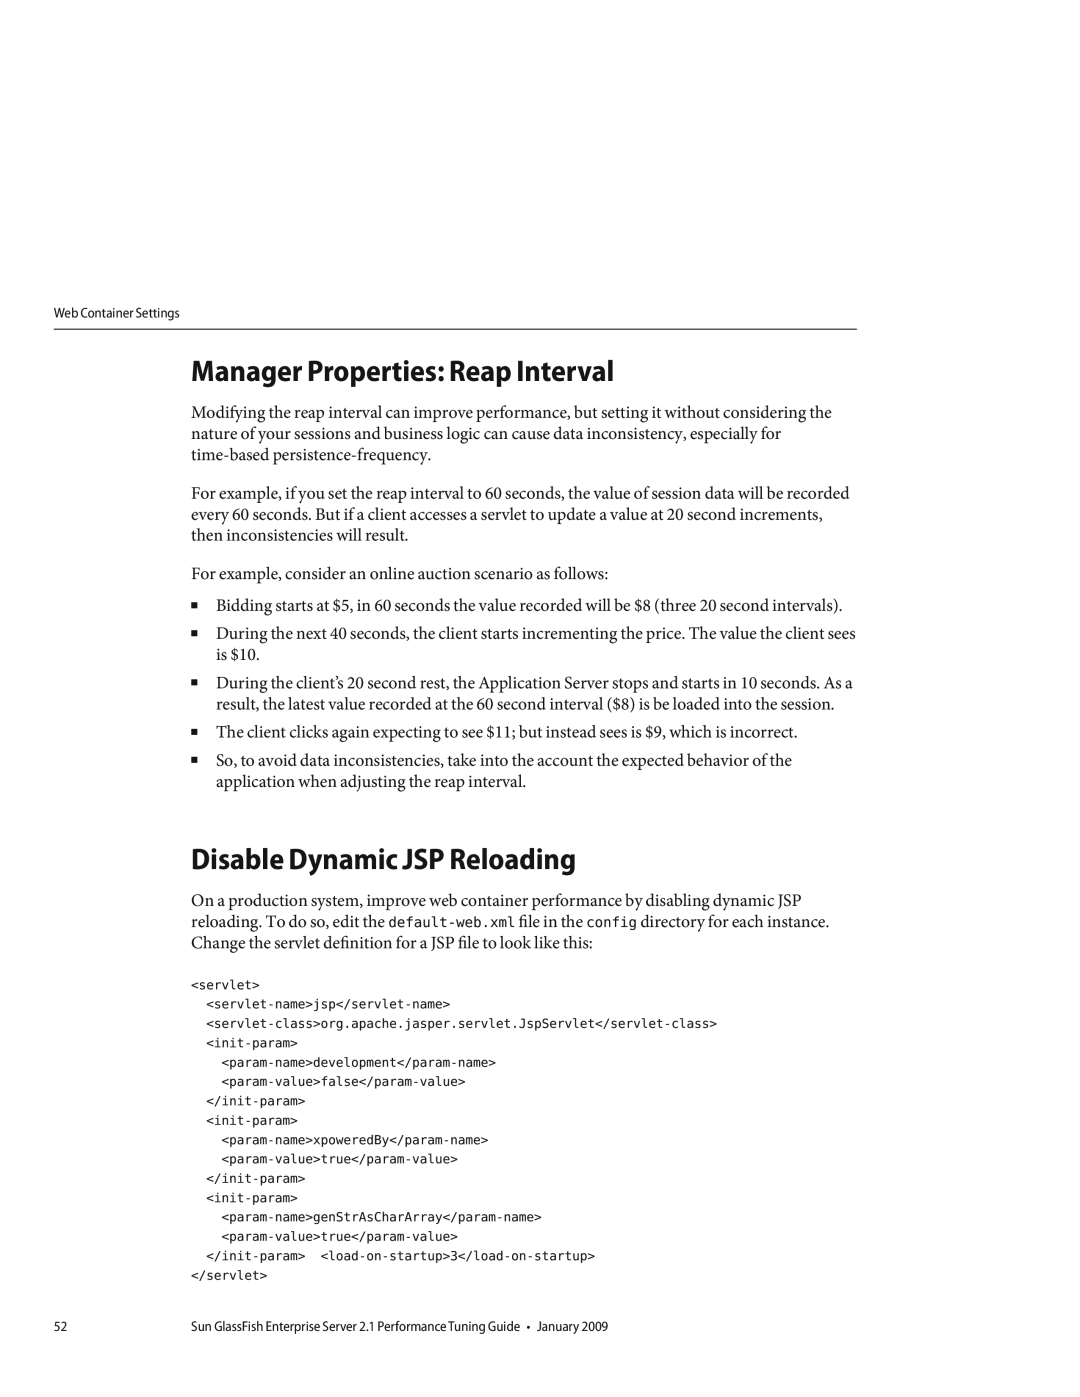 Sun Microsystems 820434310 manual Manager Properties Reap Interval, Disable Dynamic JSP Reloading 